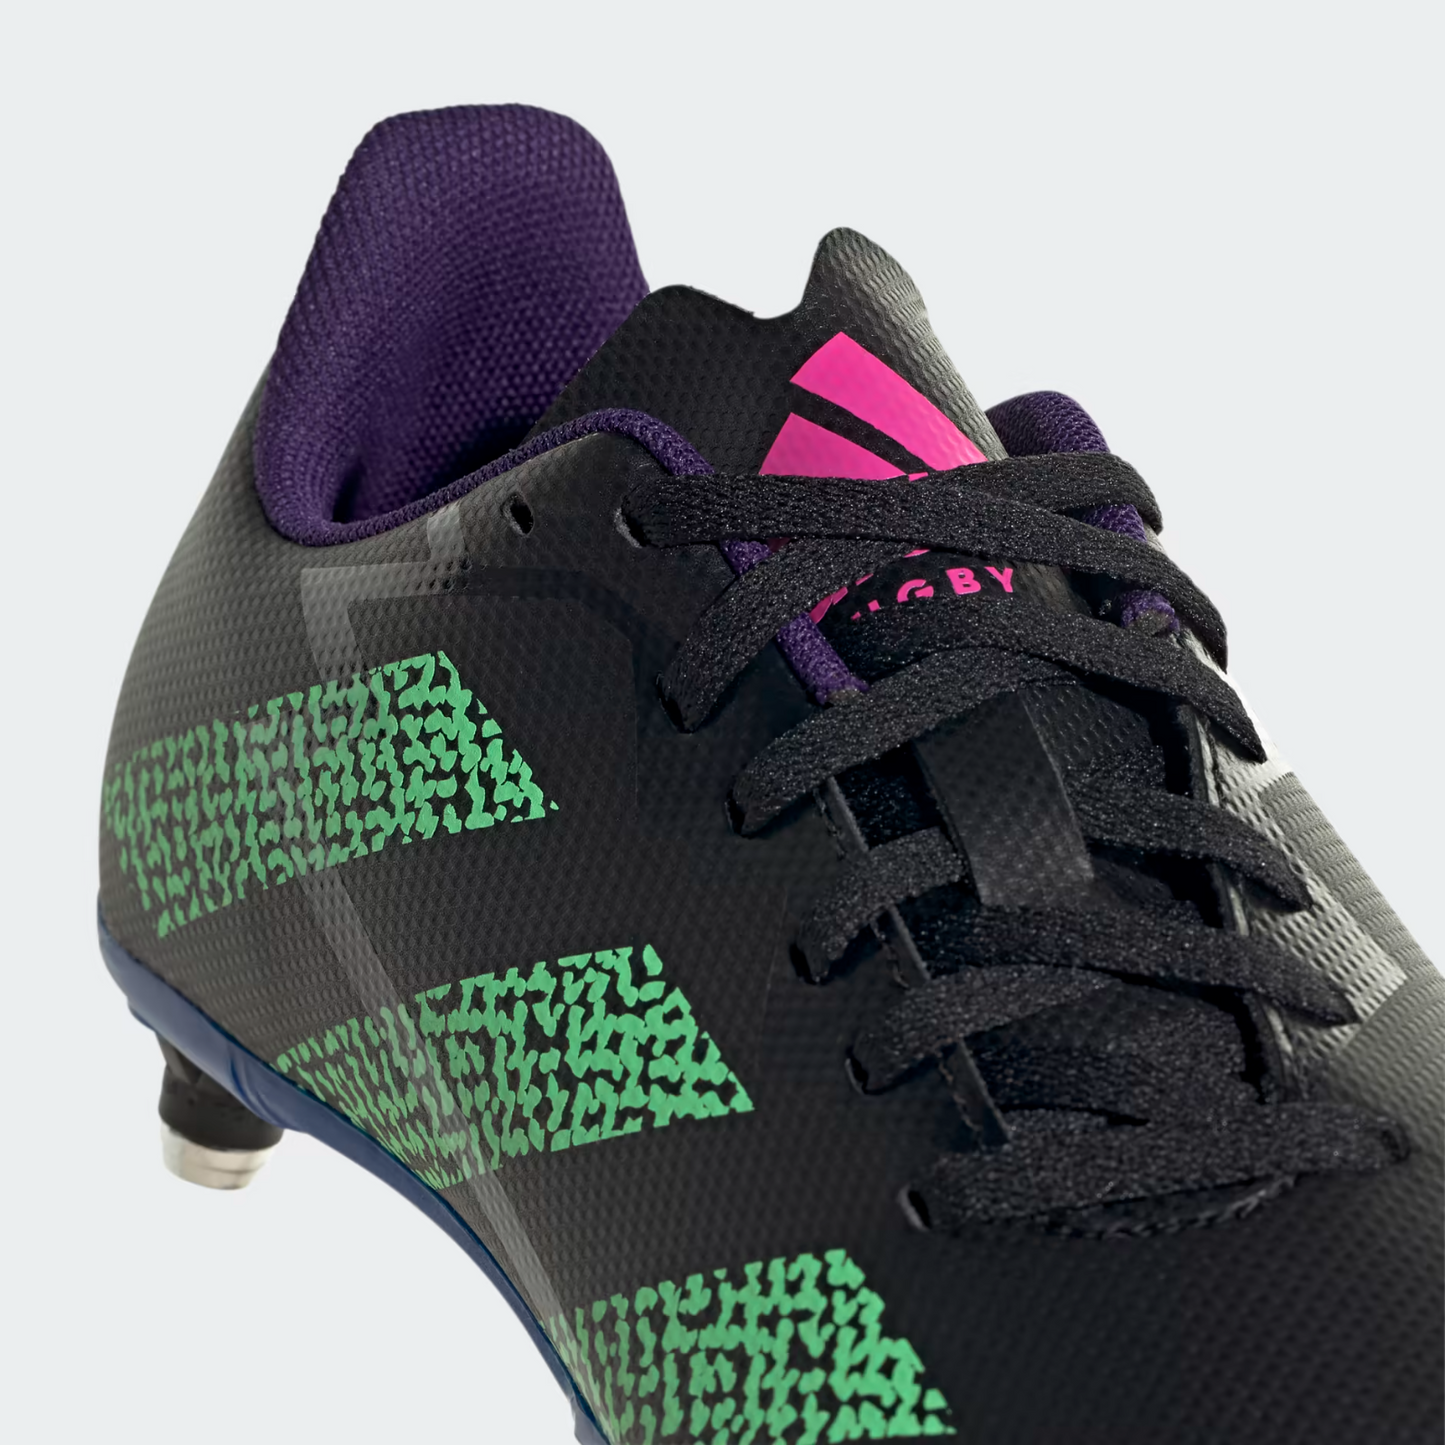 adidas Rugby Junior SG Boots - Core Black